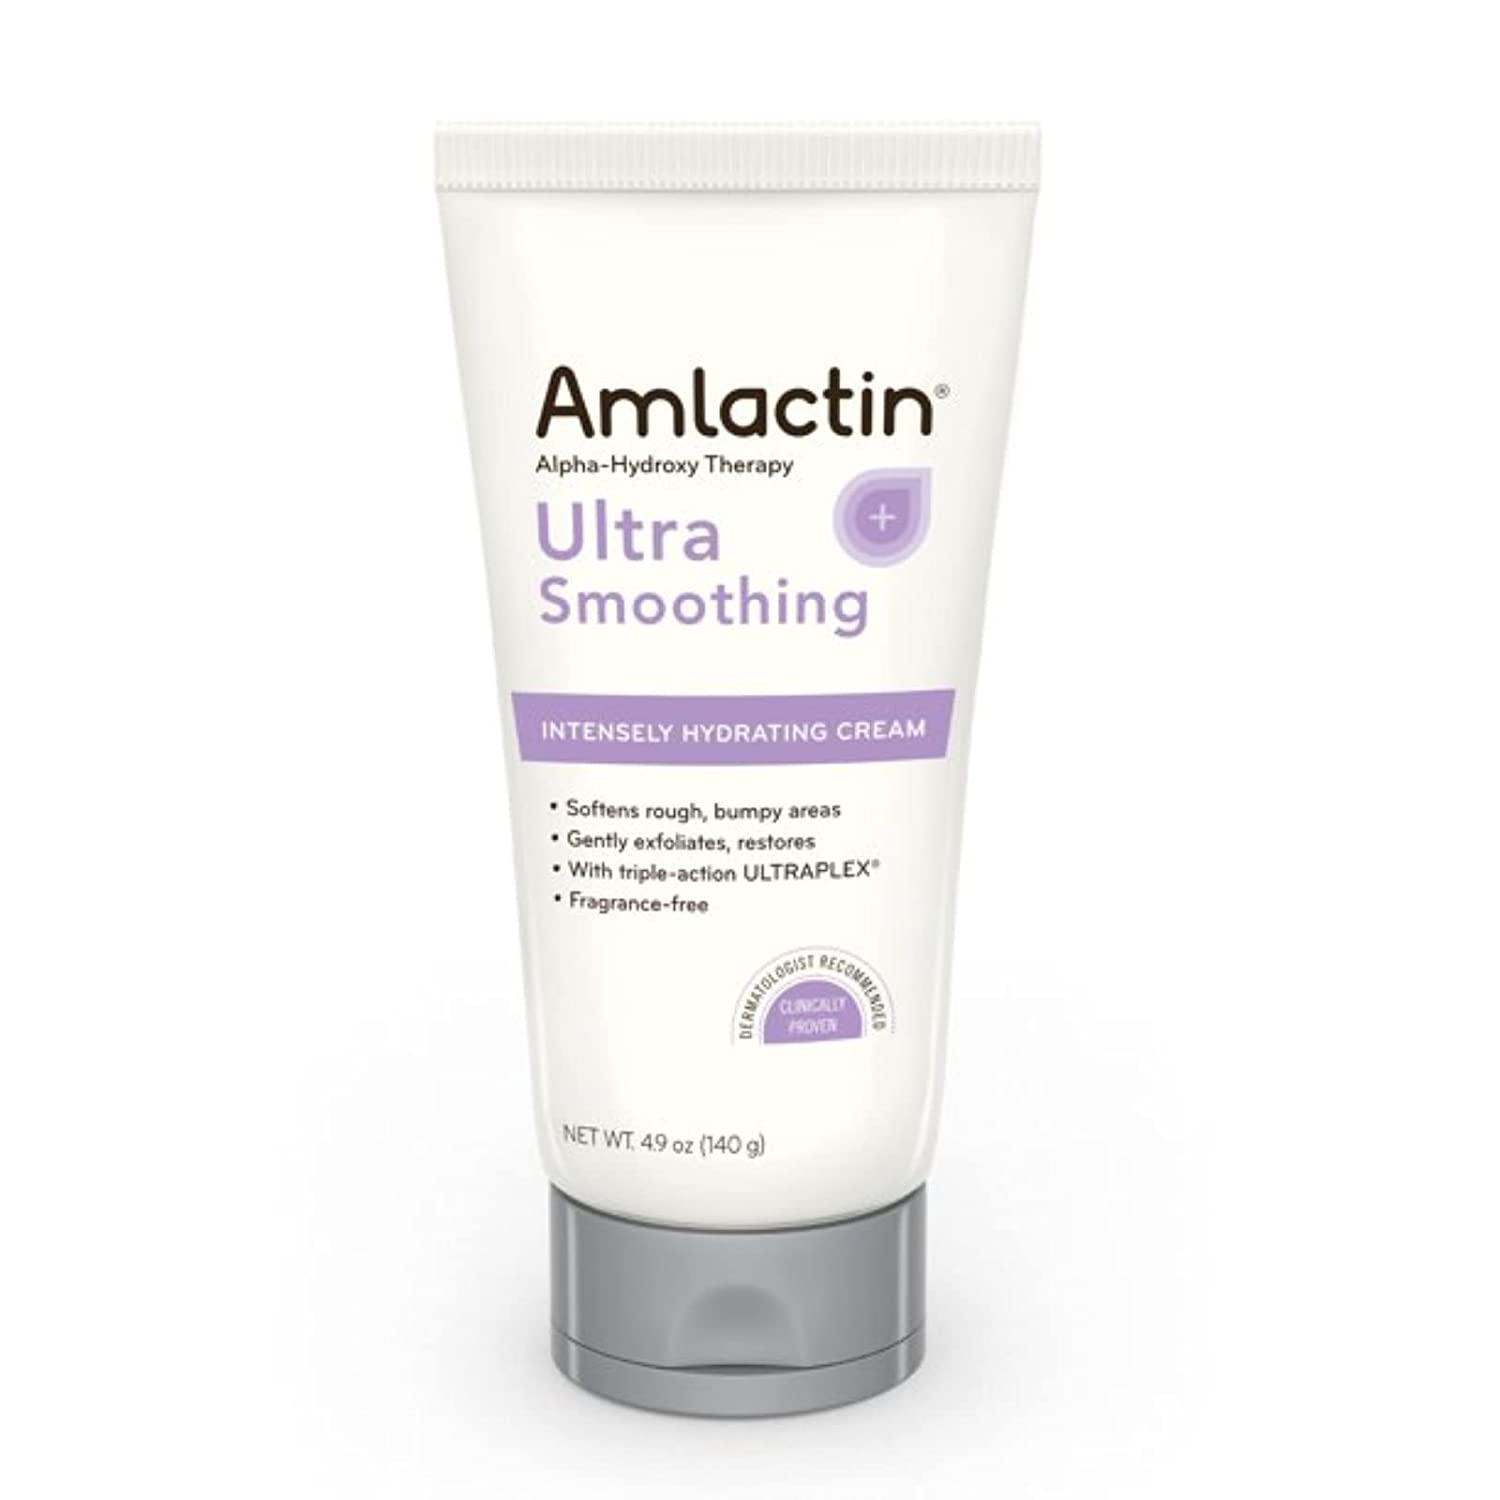 AmLactin Ultra Smoothing Intensely Hydrating Cream, products for smoother skin